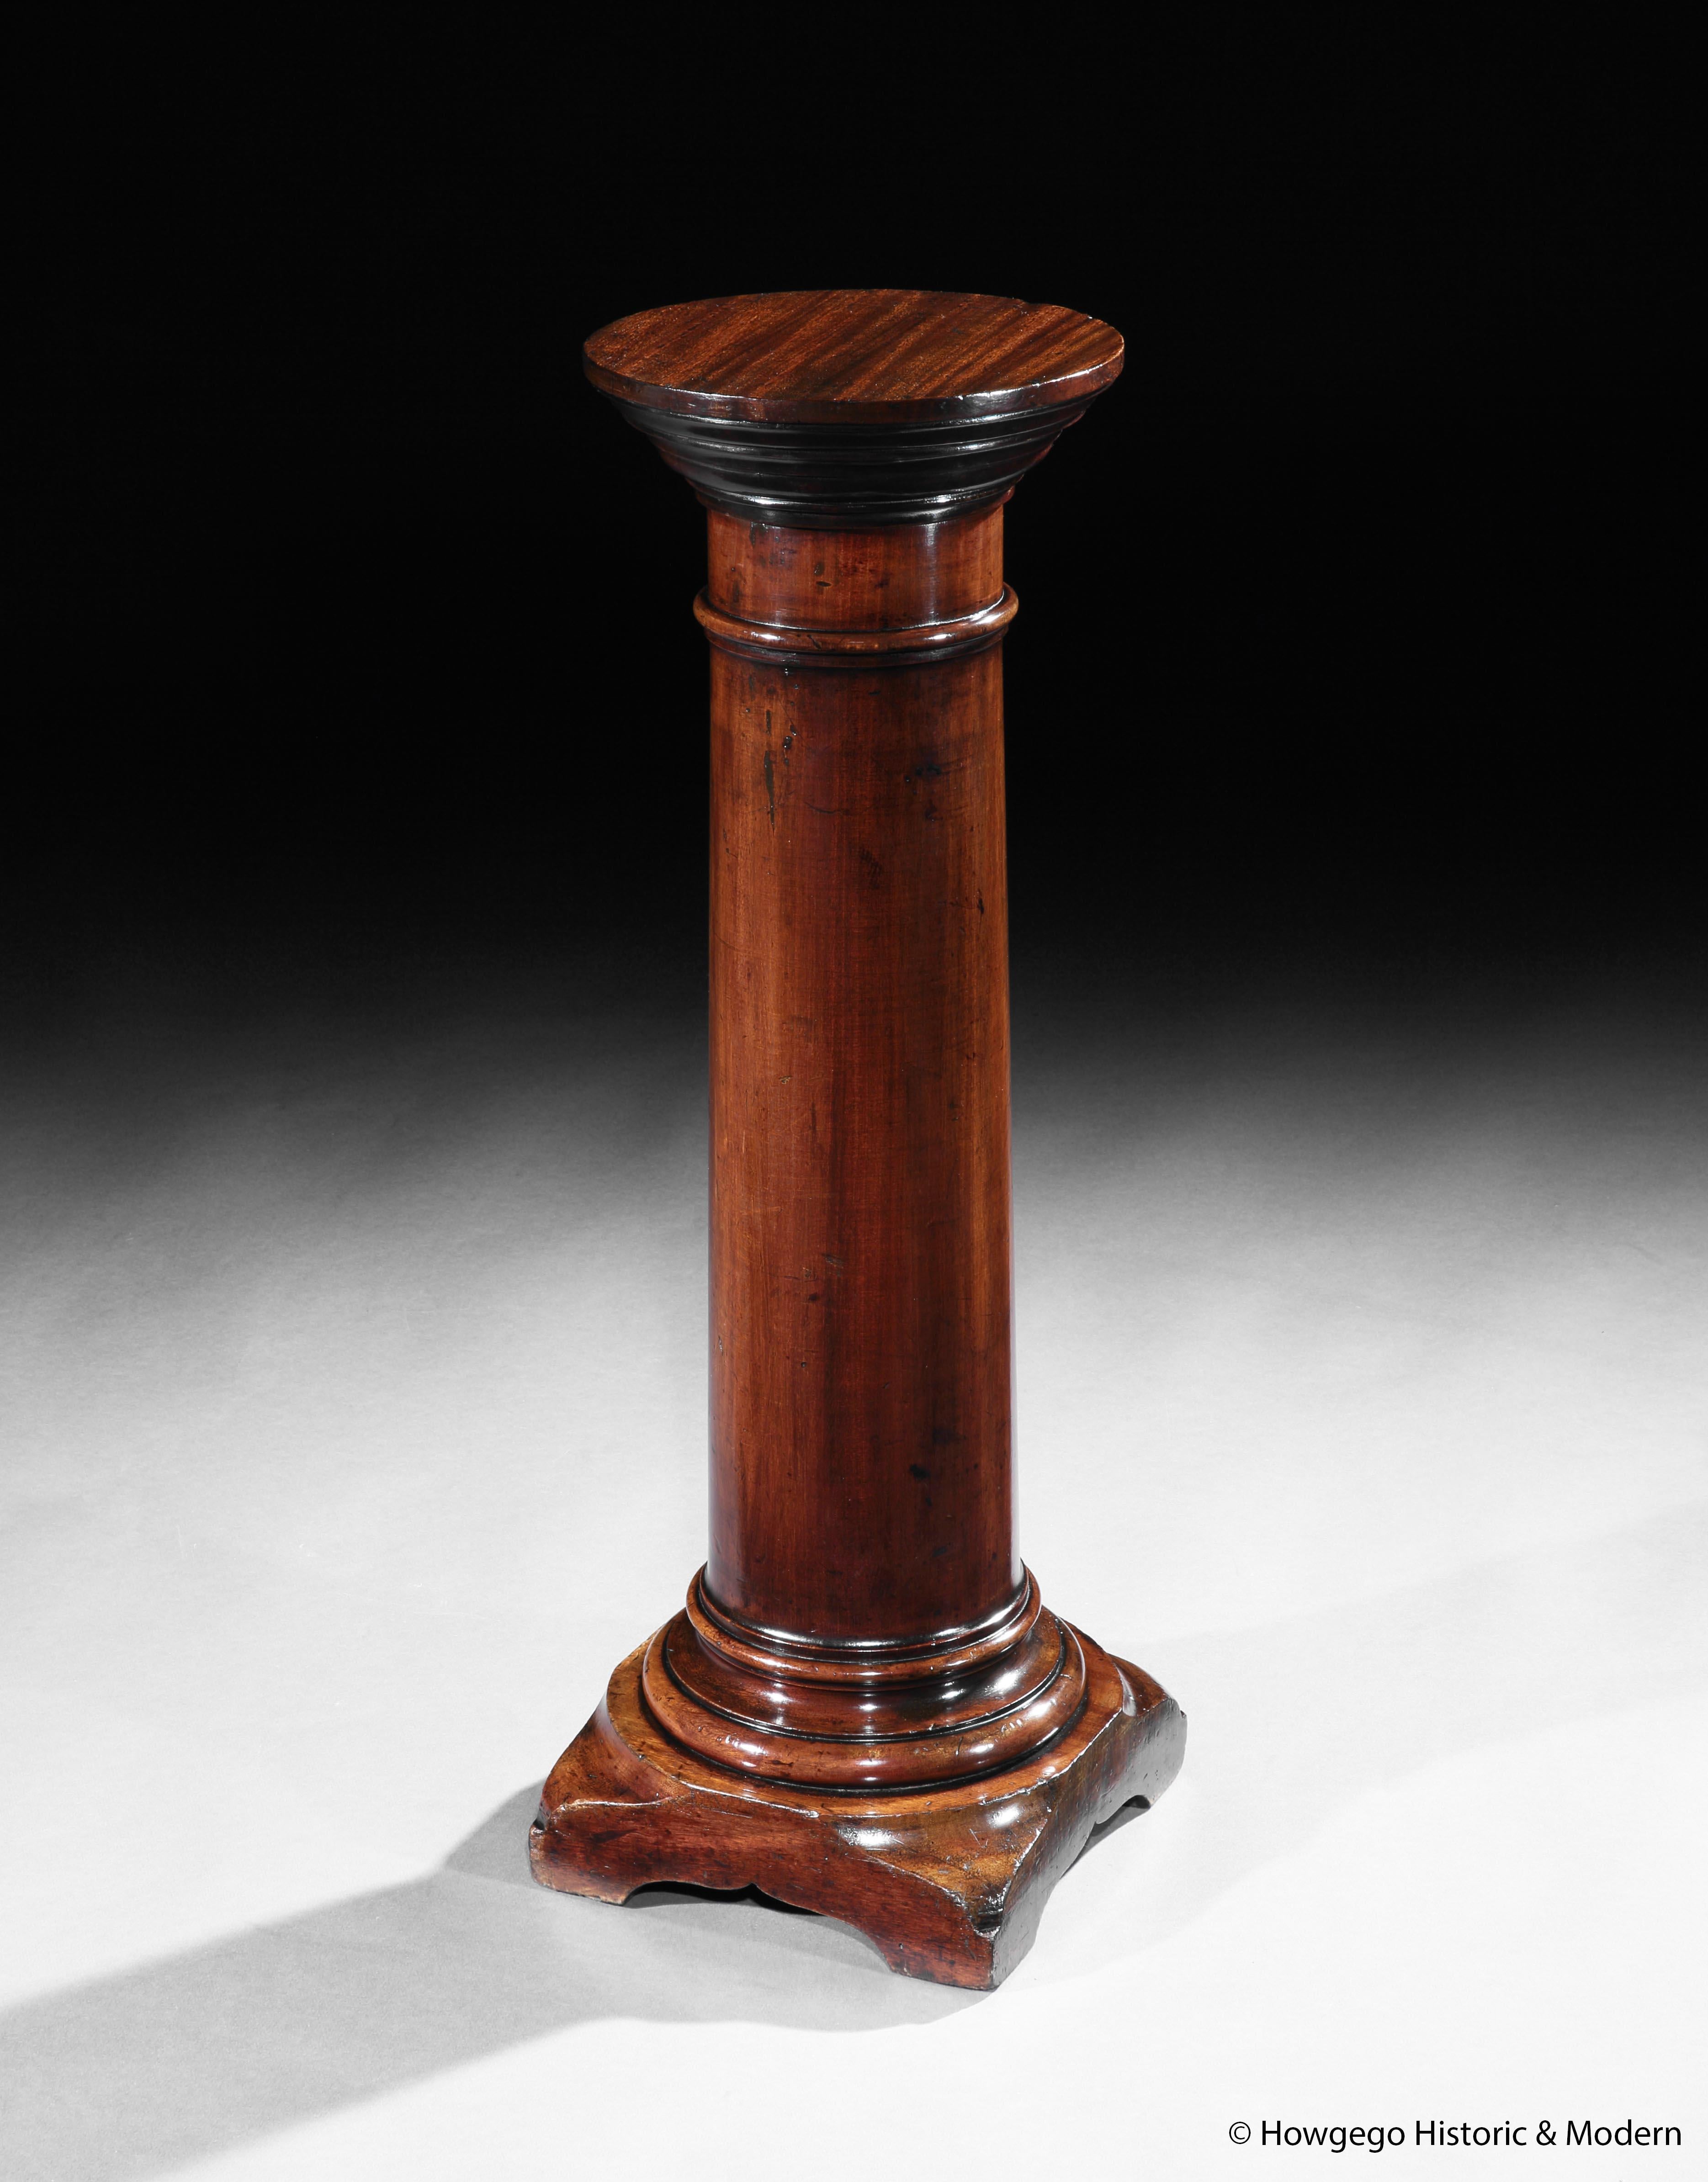 - Classical 19th century, solid Mahogany Roman Tuscan classical column pedestal display stand 
- Unusual low height, 85 cm high, perfect for a lamp or displaying a scultpture or ceramics
- The circular top with lovely straight grain figuring. 
 -